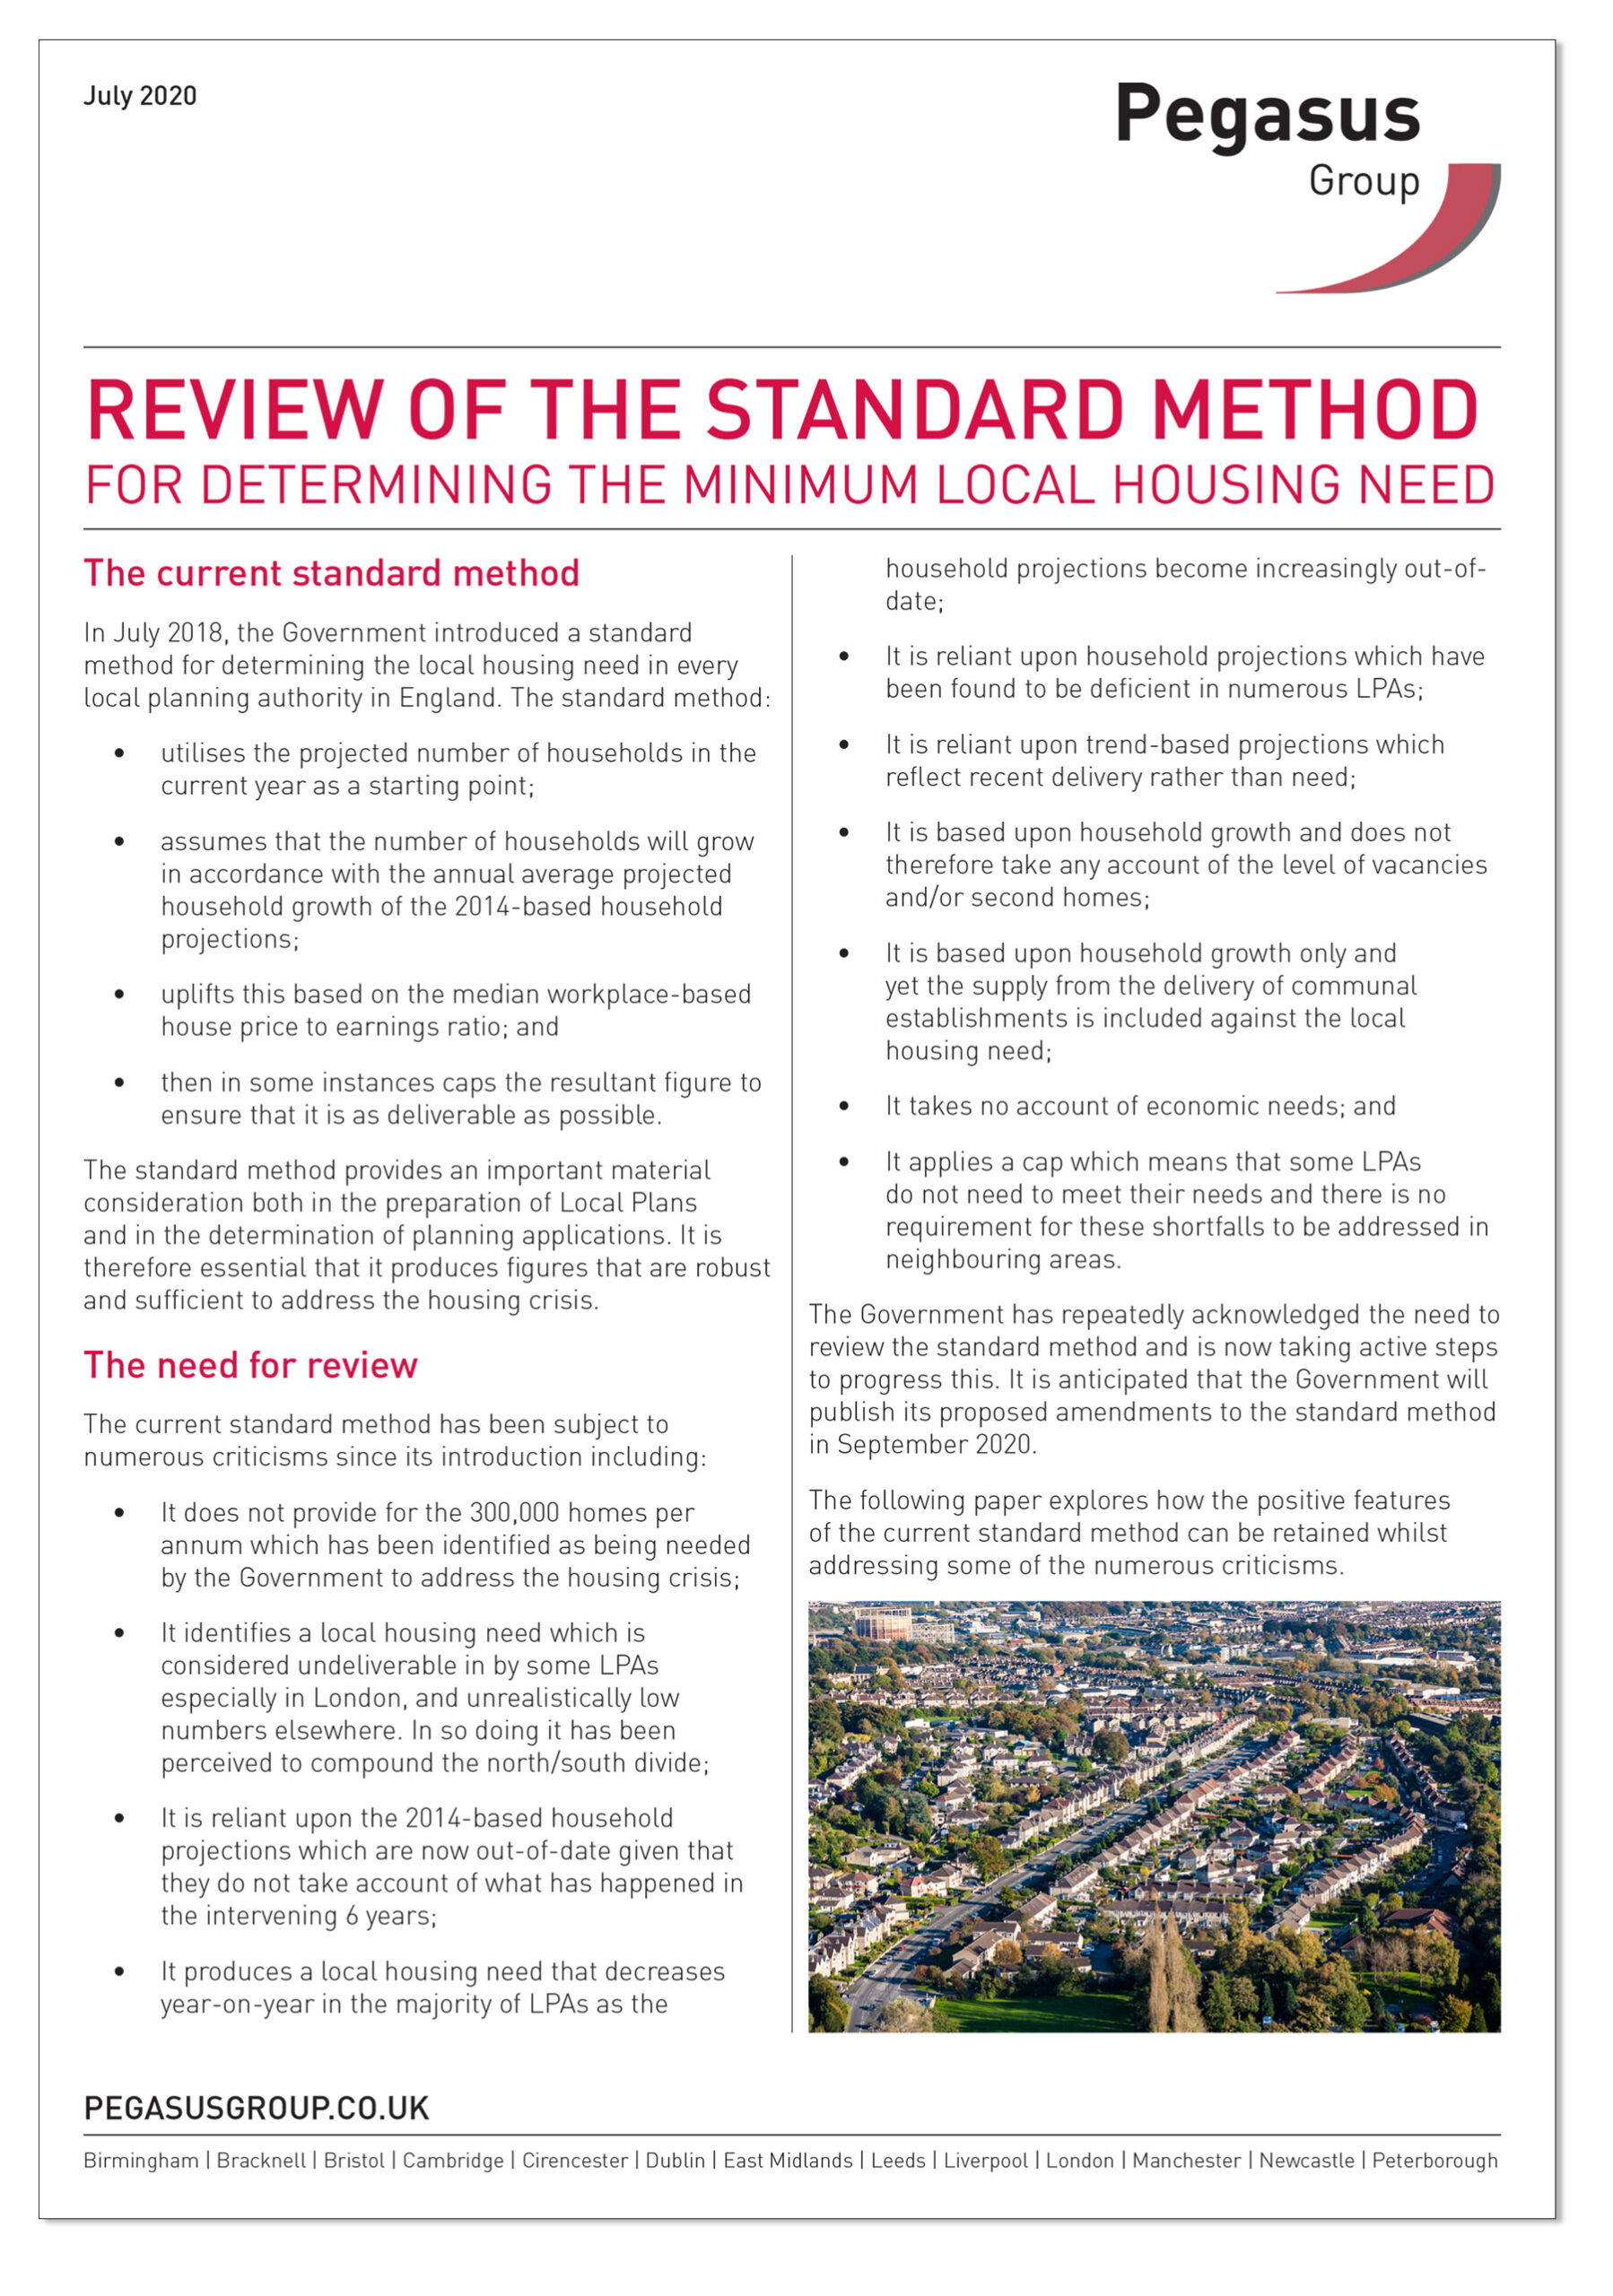 Review of the Standard Method July 2020